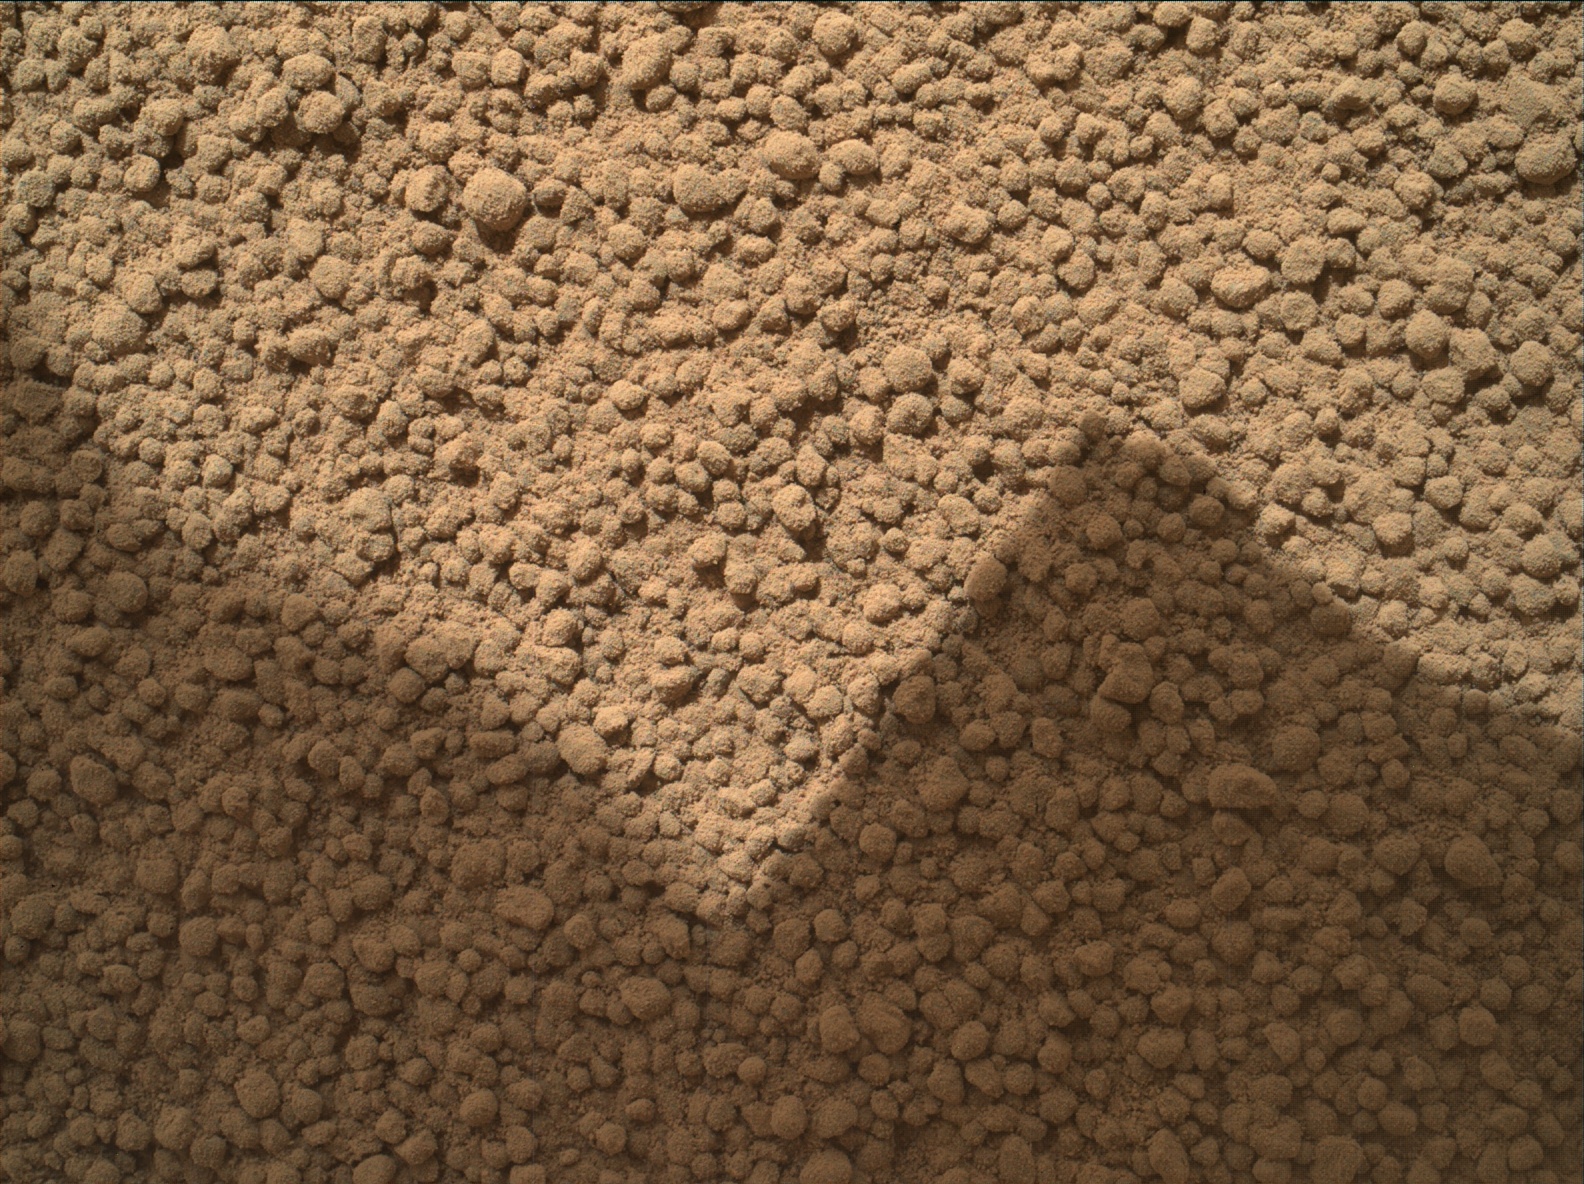 Nasa's Mars rover Curiosity acquired this image using its Mars Hand Lens Imager (MAHLI) on Sol 192